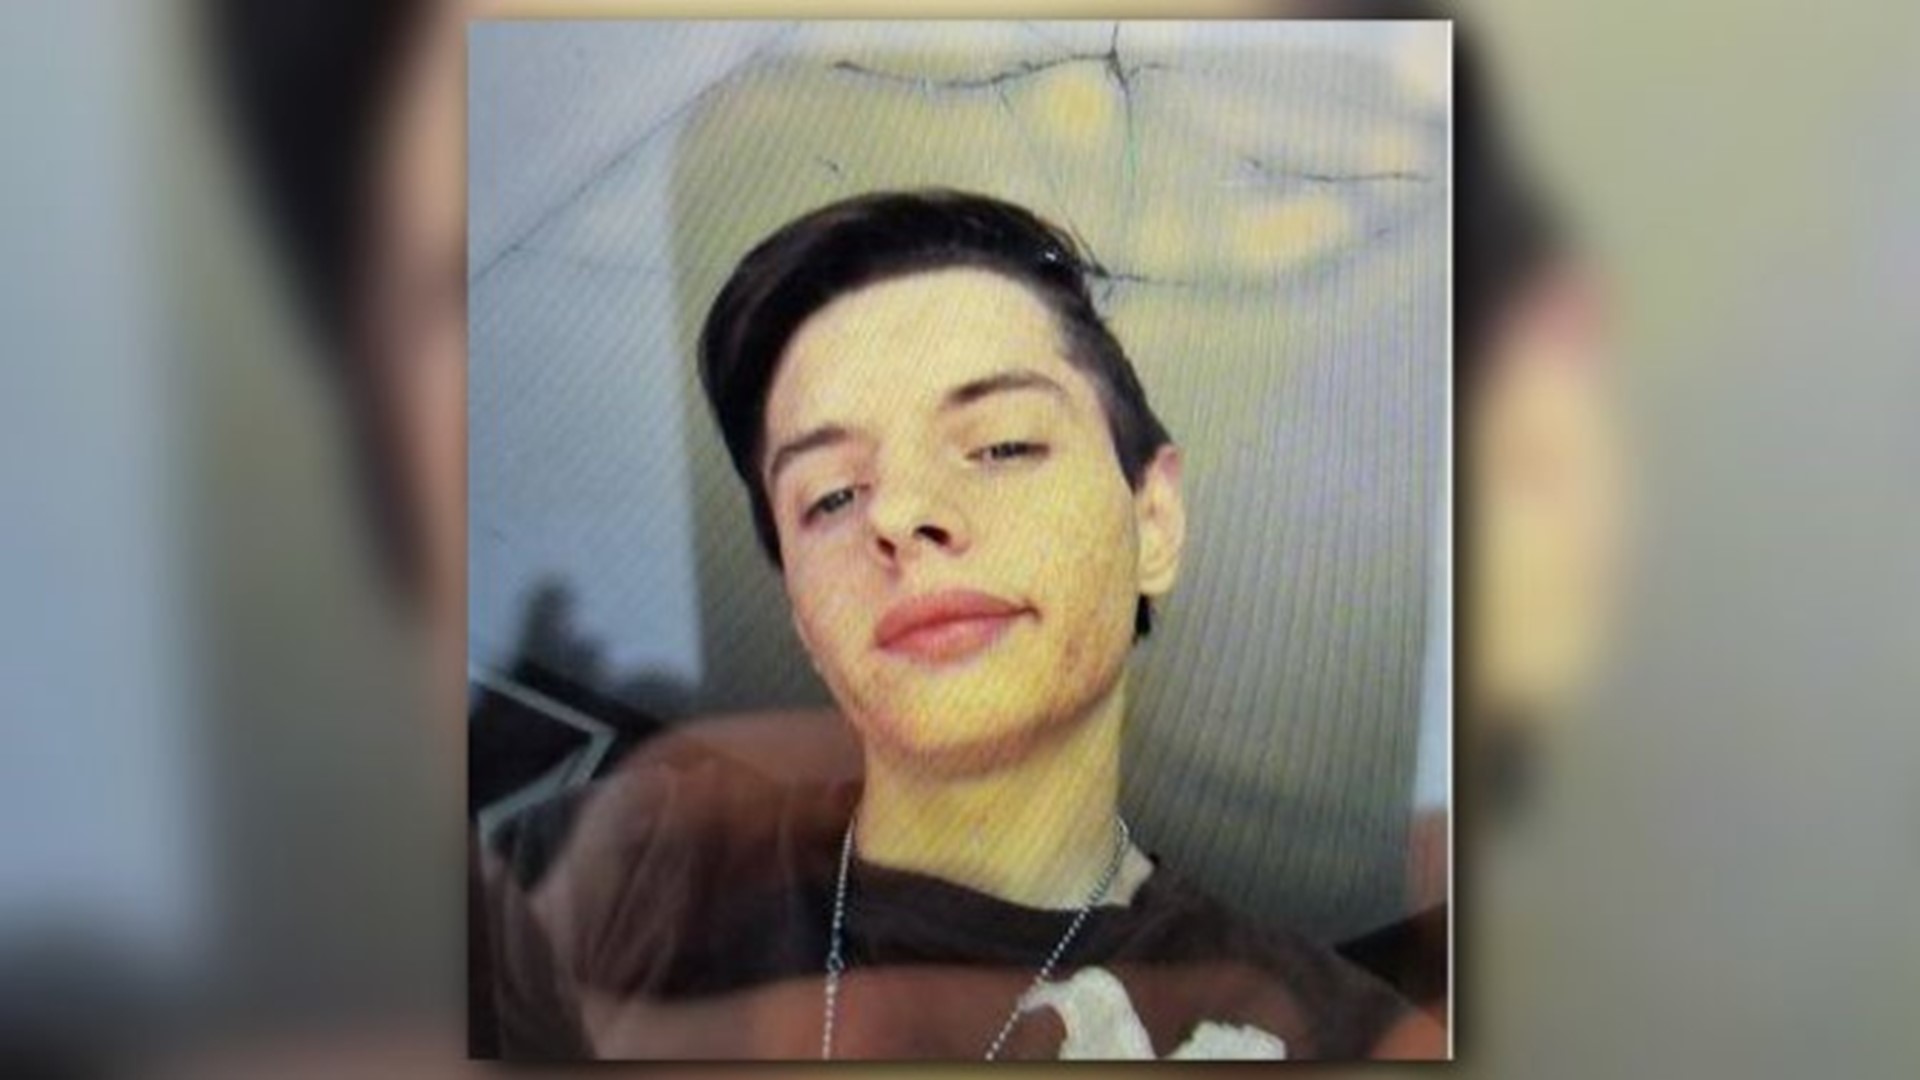 Cabot police searching for missing 15-year-old boy, last seen wearing camouflage